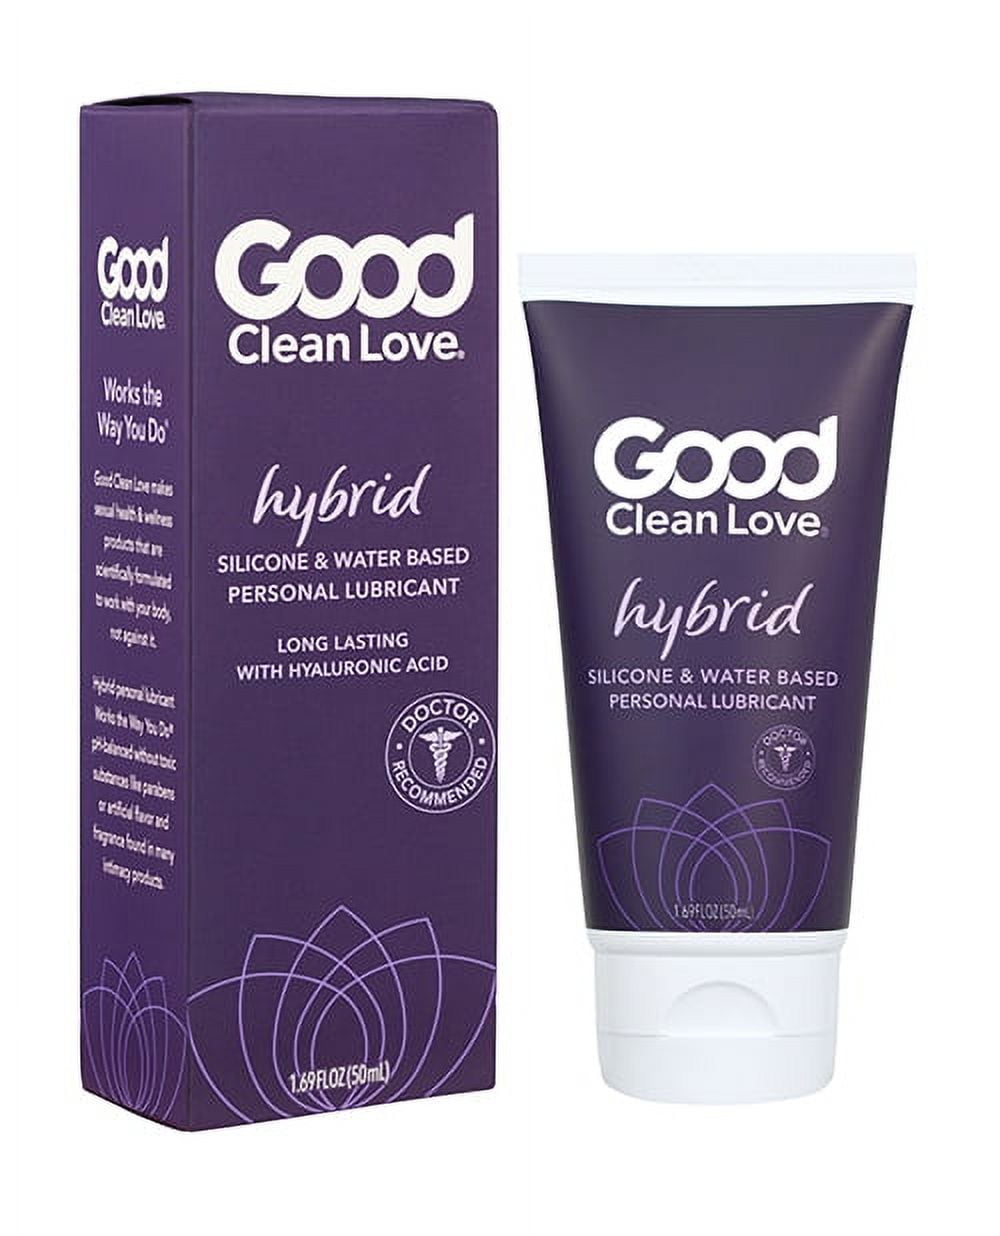 Good Clean Love Hybrid Silicone and Water Based Personal Lubricant, Premium Lasting Lube with Hyaluronic Acid, Safe for Condoms, Sexual Wellness Gel for Men and Women, 1.69 oz